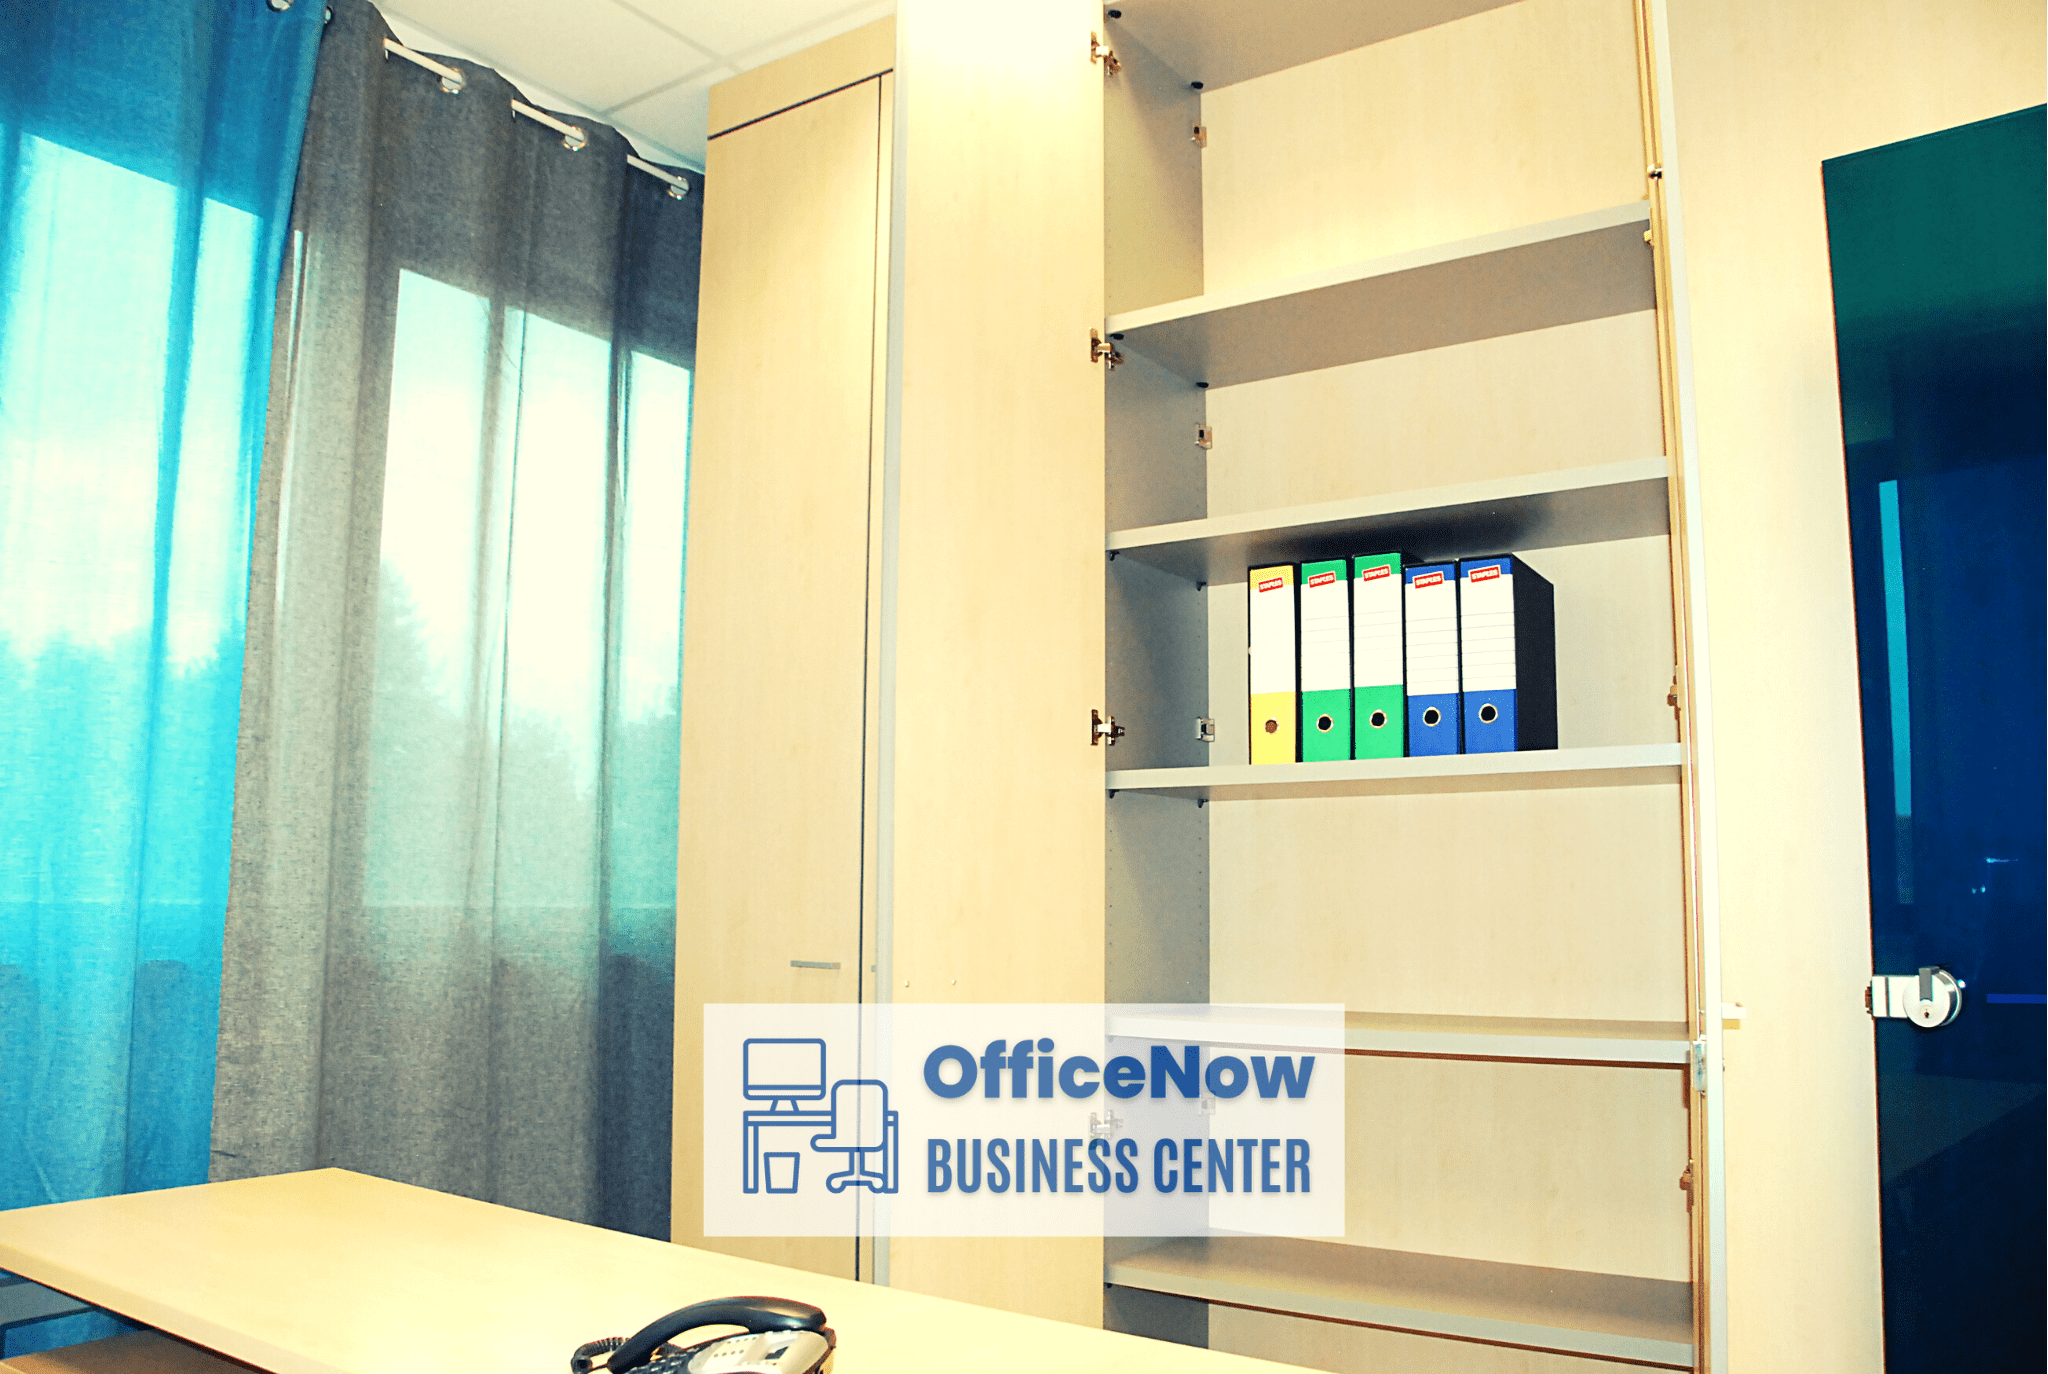 OfficeNow, office for rent in Malpensa, office with large library, perfect for working remotely in peace